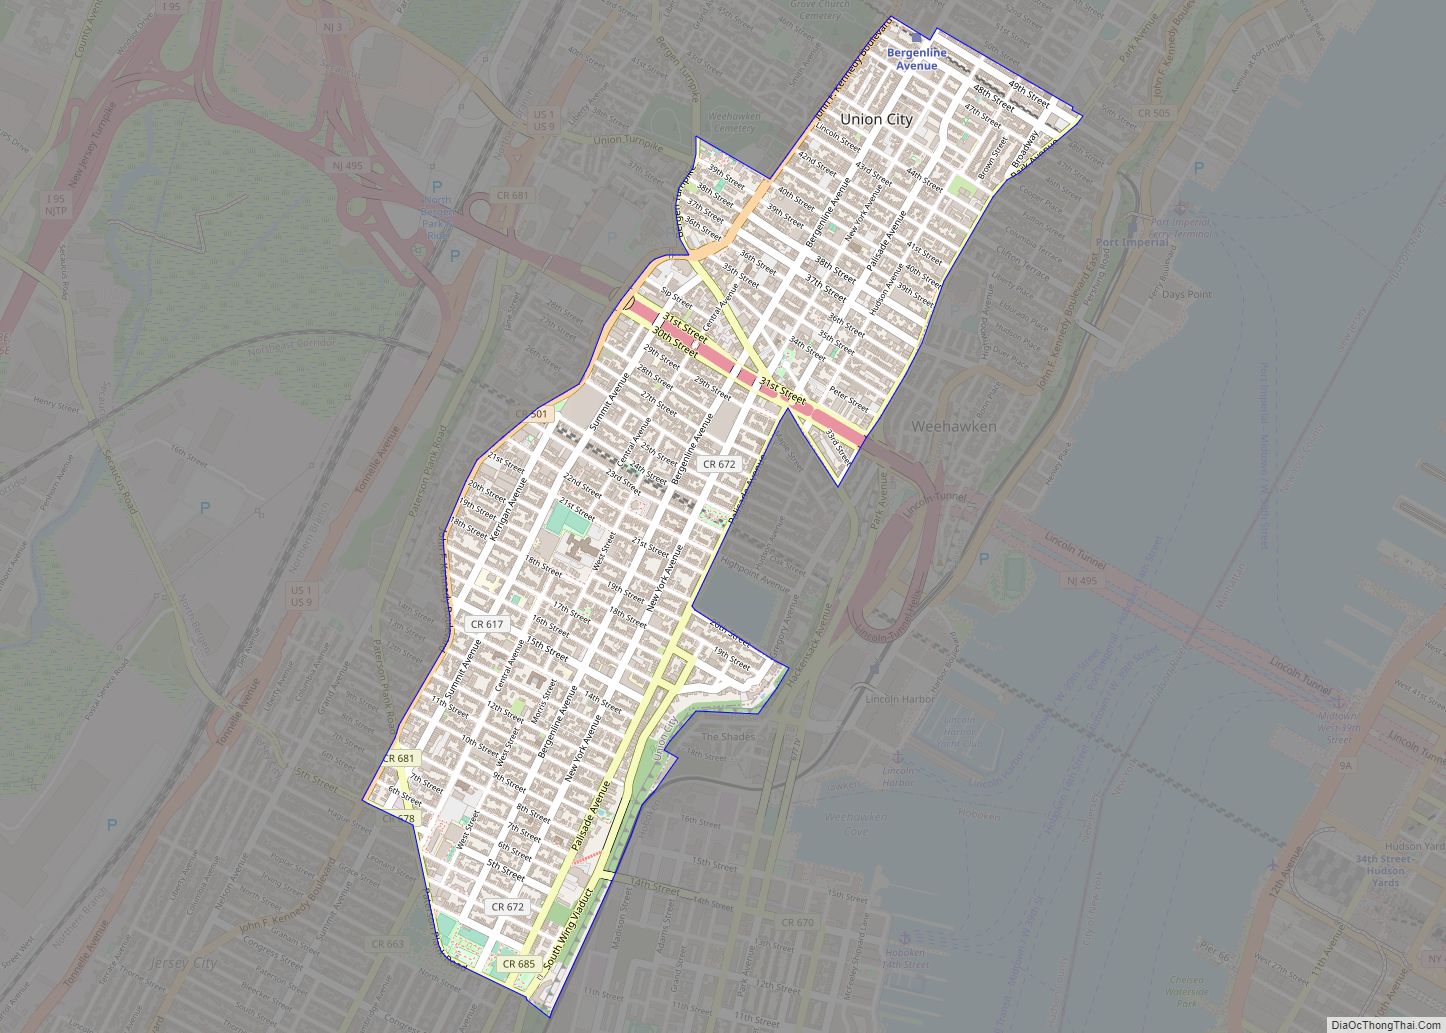 Map of Union City, New Jersey